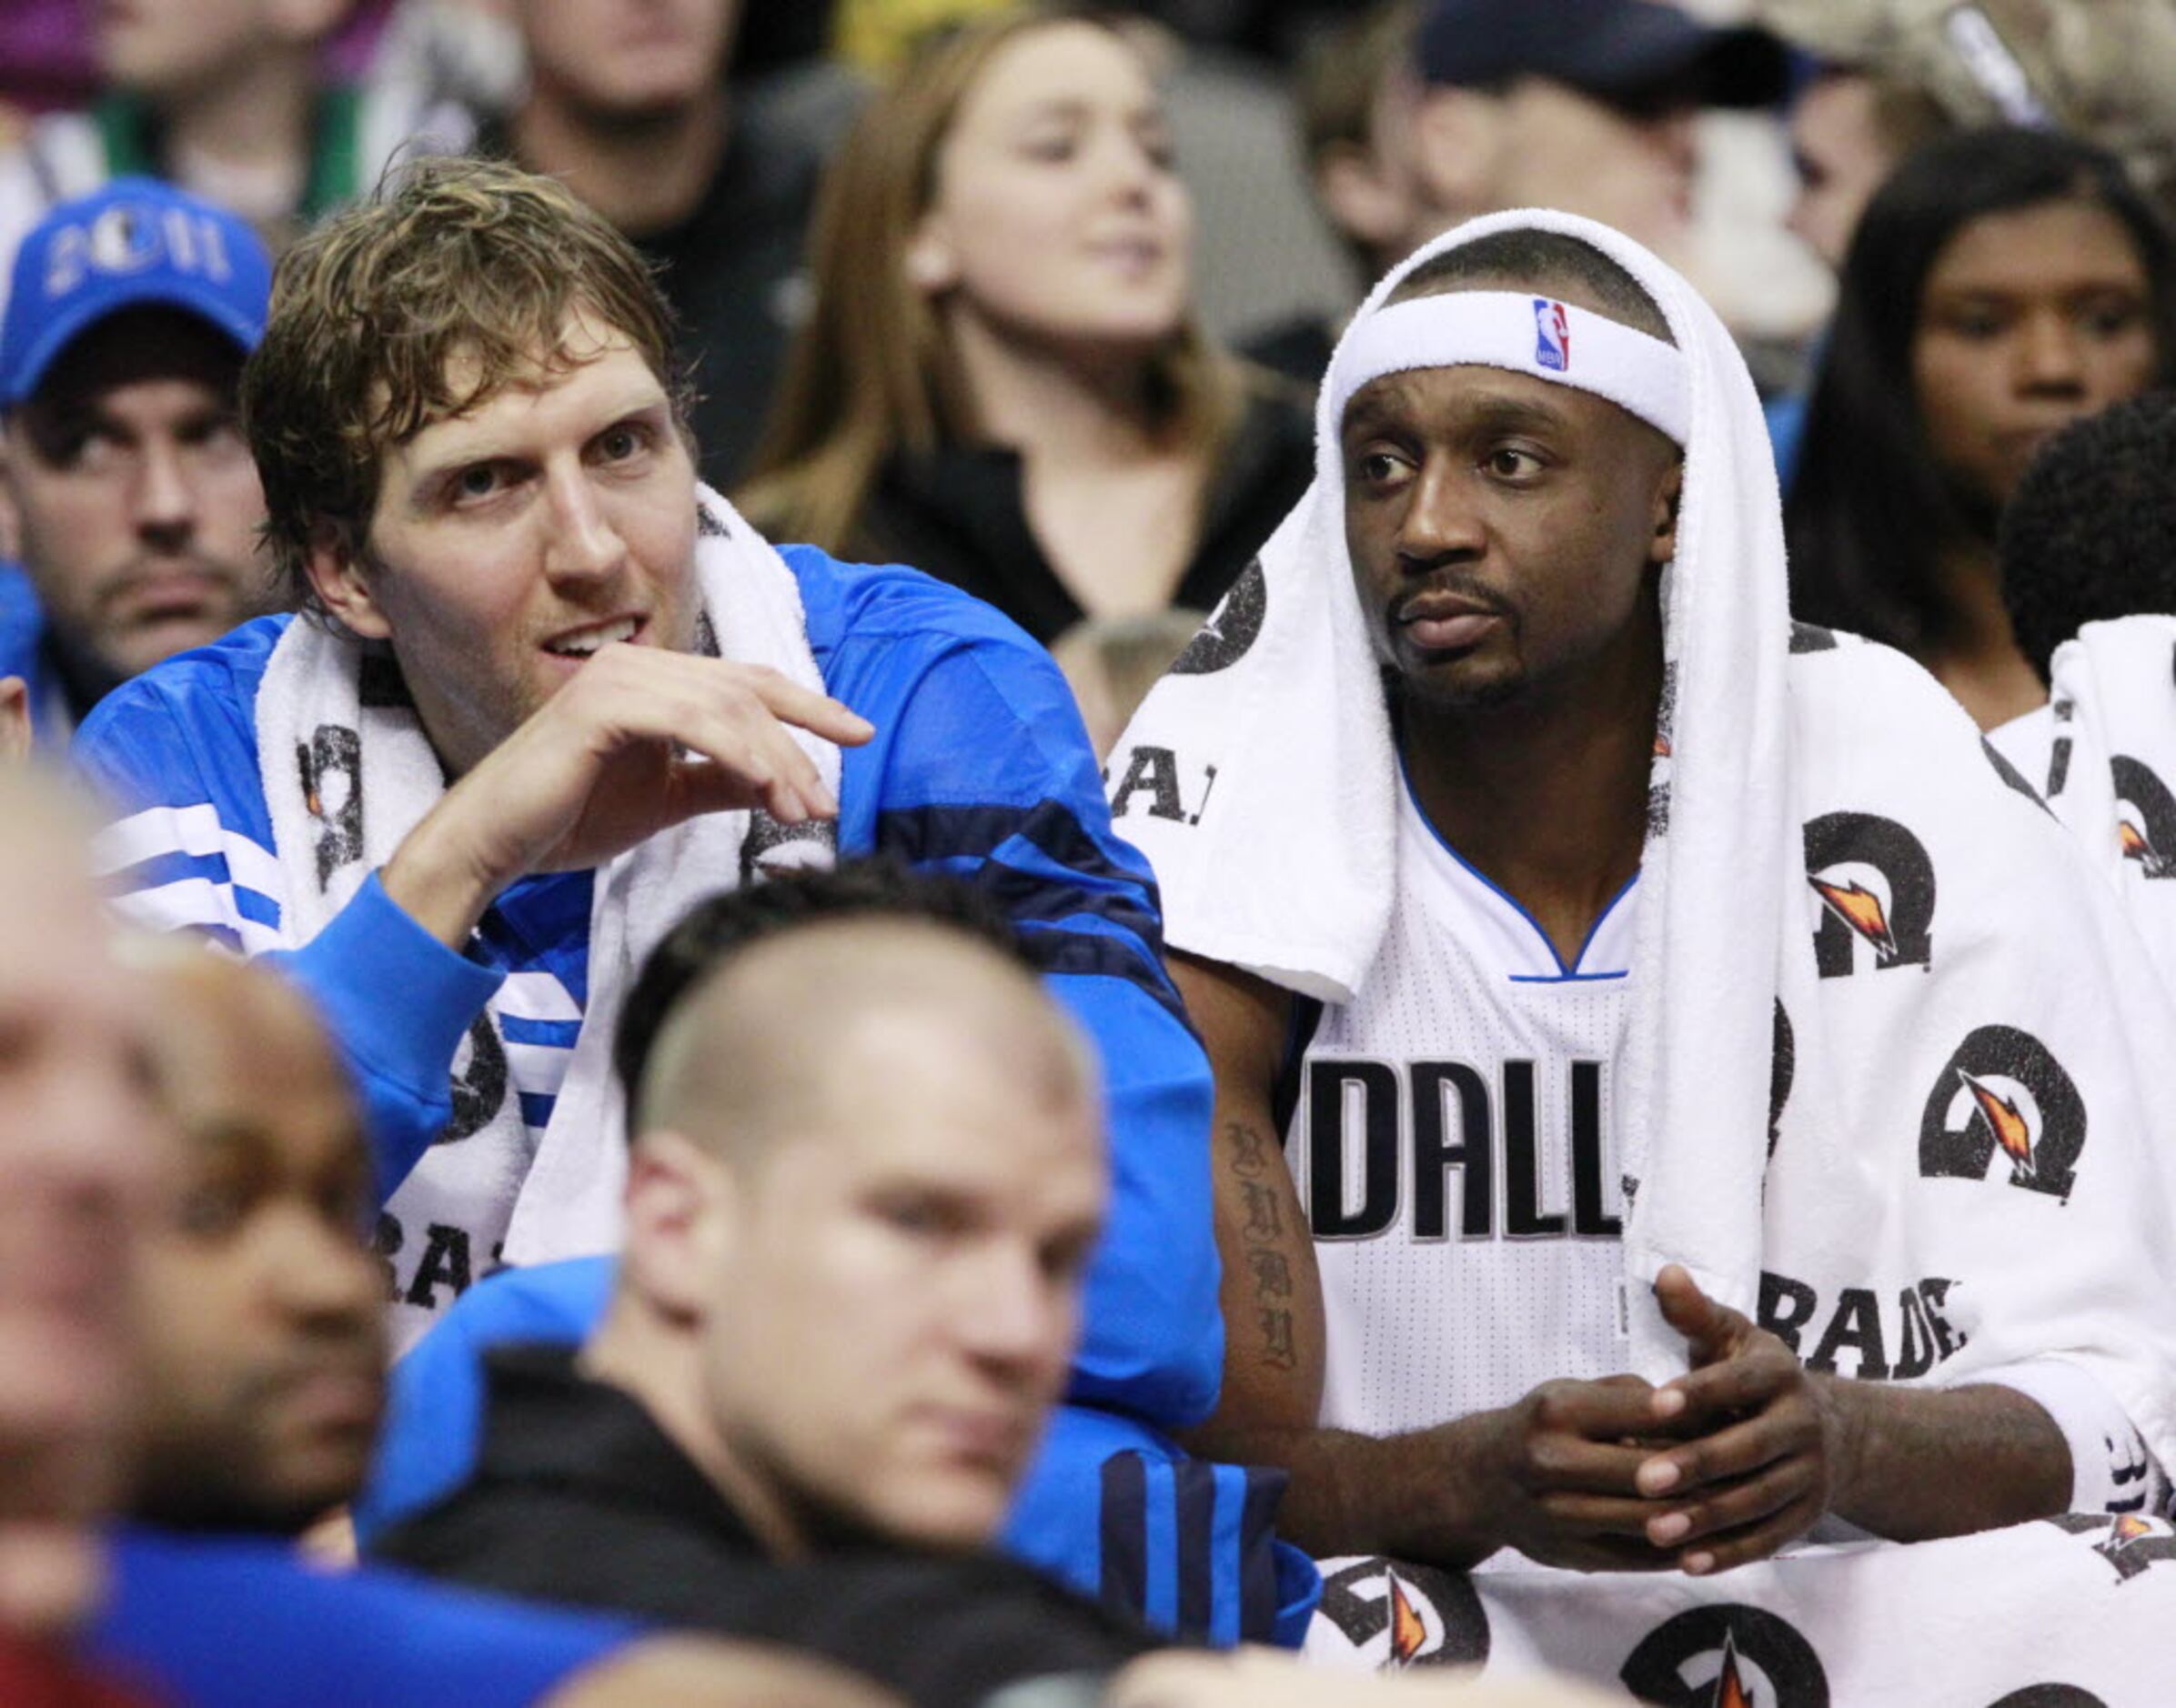 I know you and Dirk ain't gonna stop sh*t, but - Jason Terry